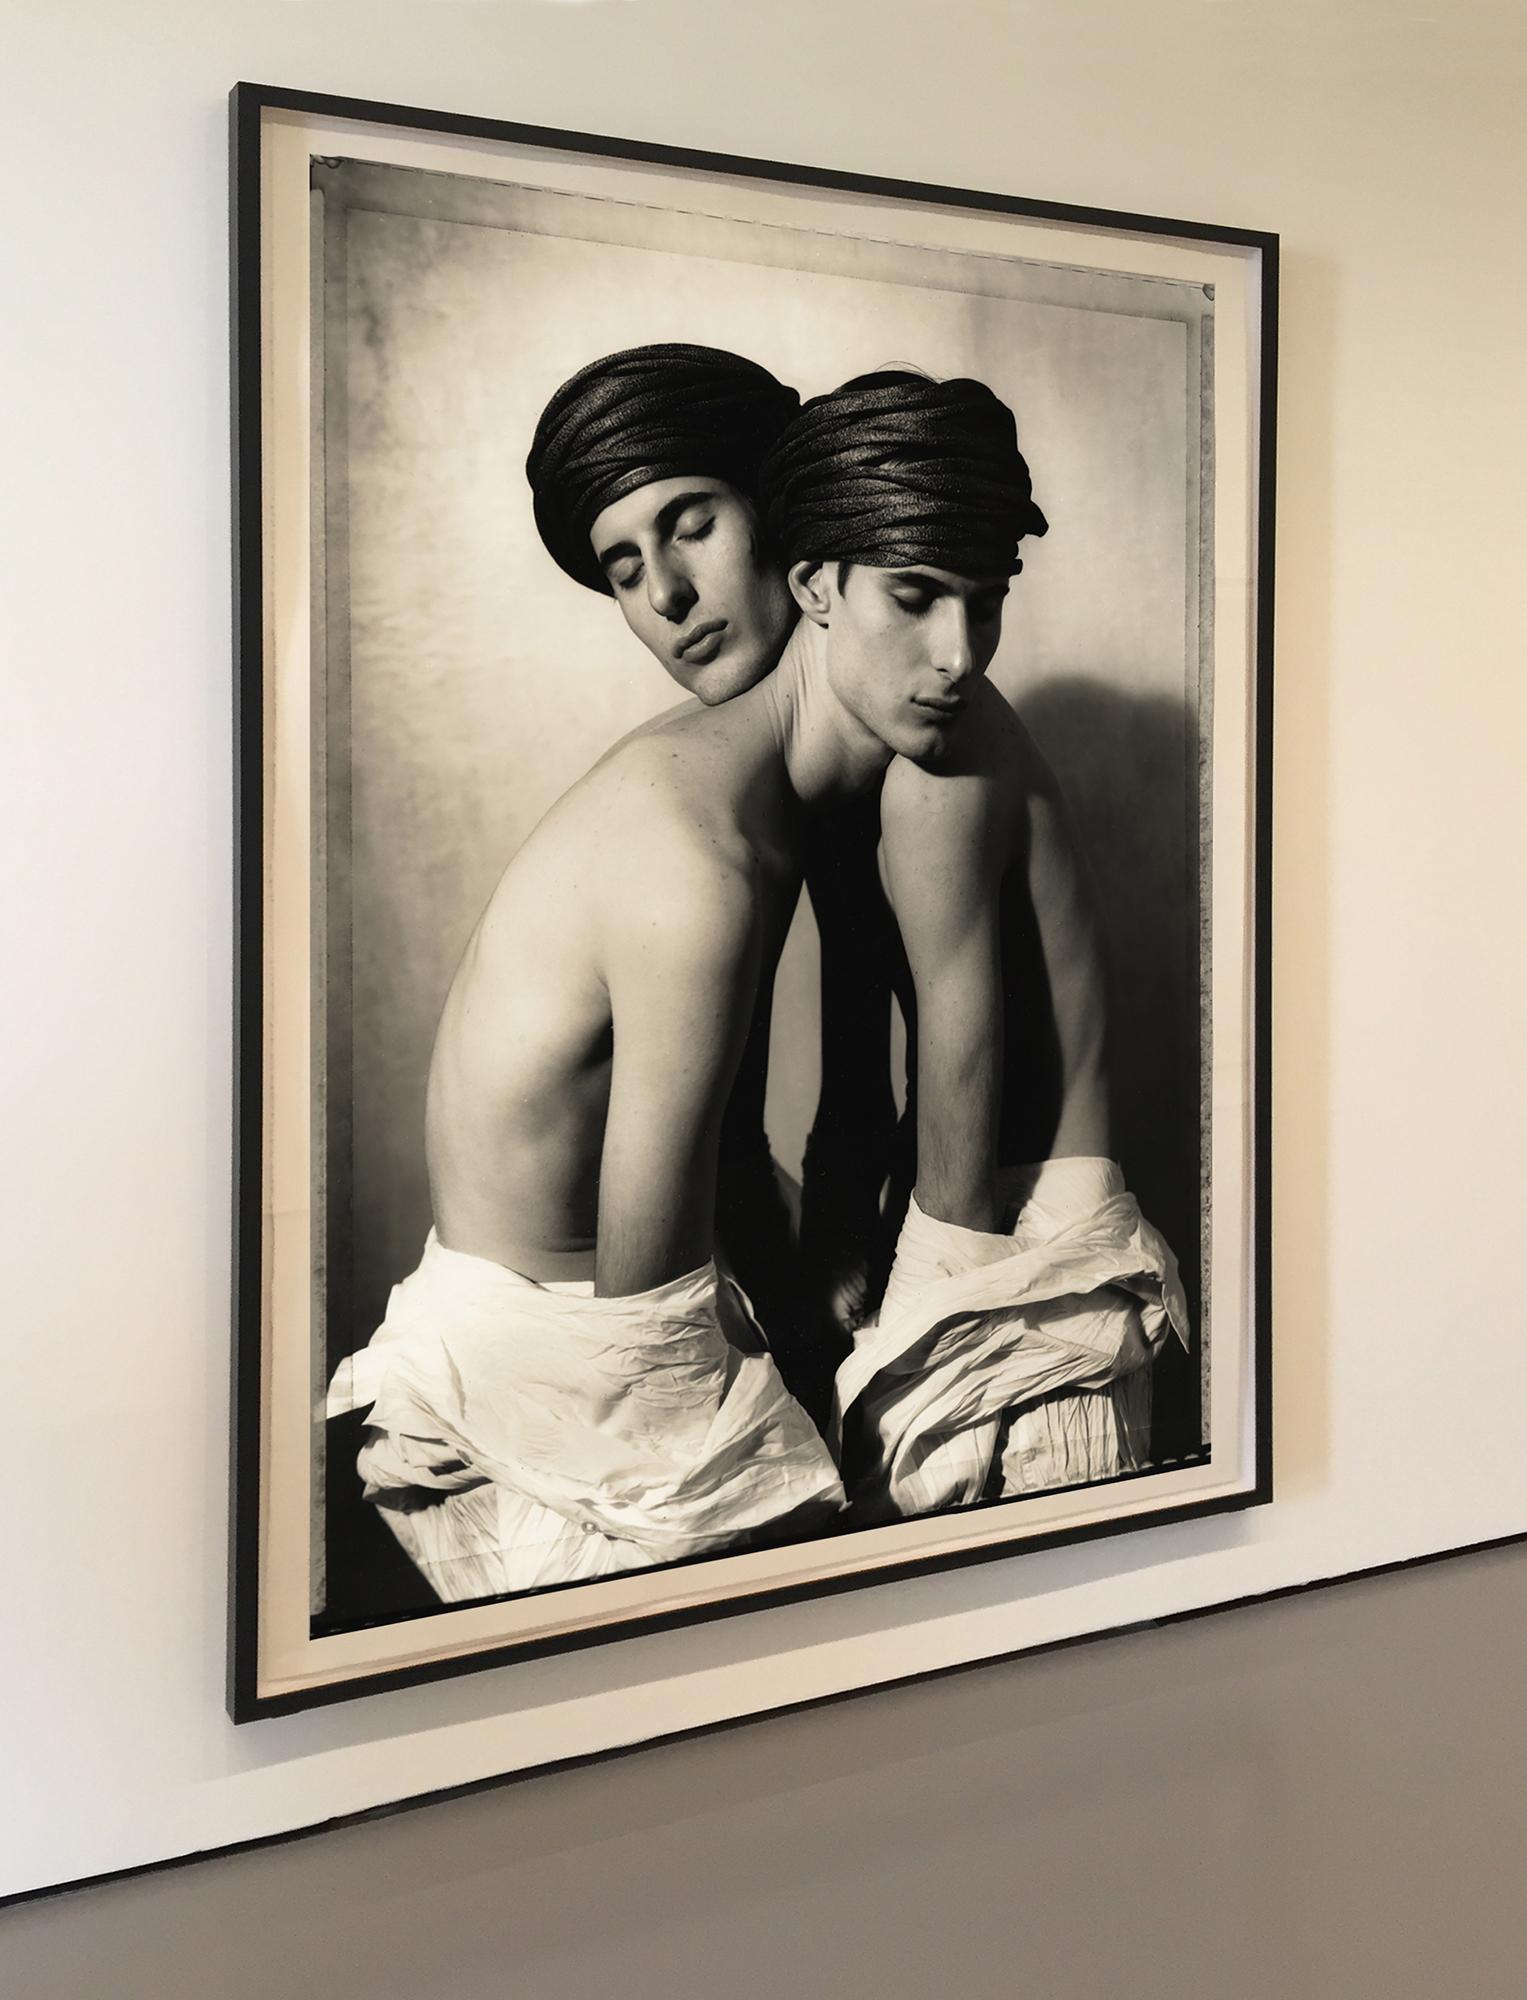 Twins Entwined, 1991: Identical twins photographed together in studio portrait. For Sale 3